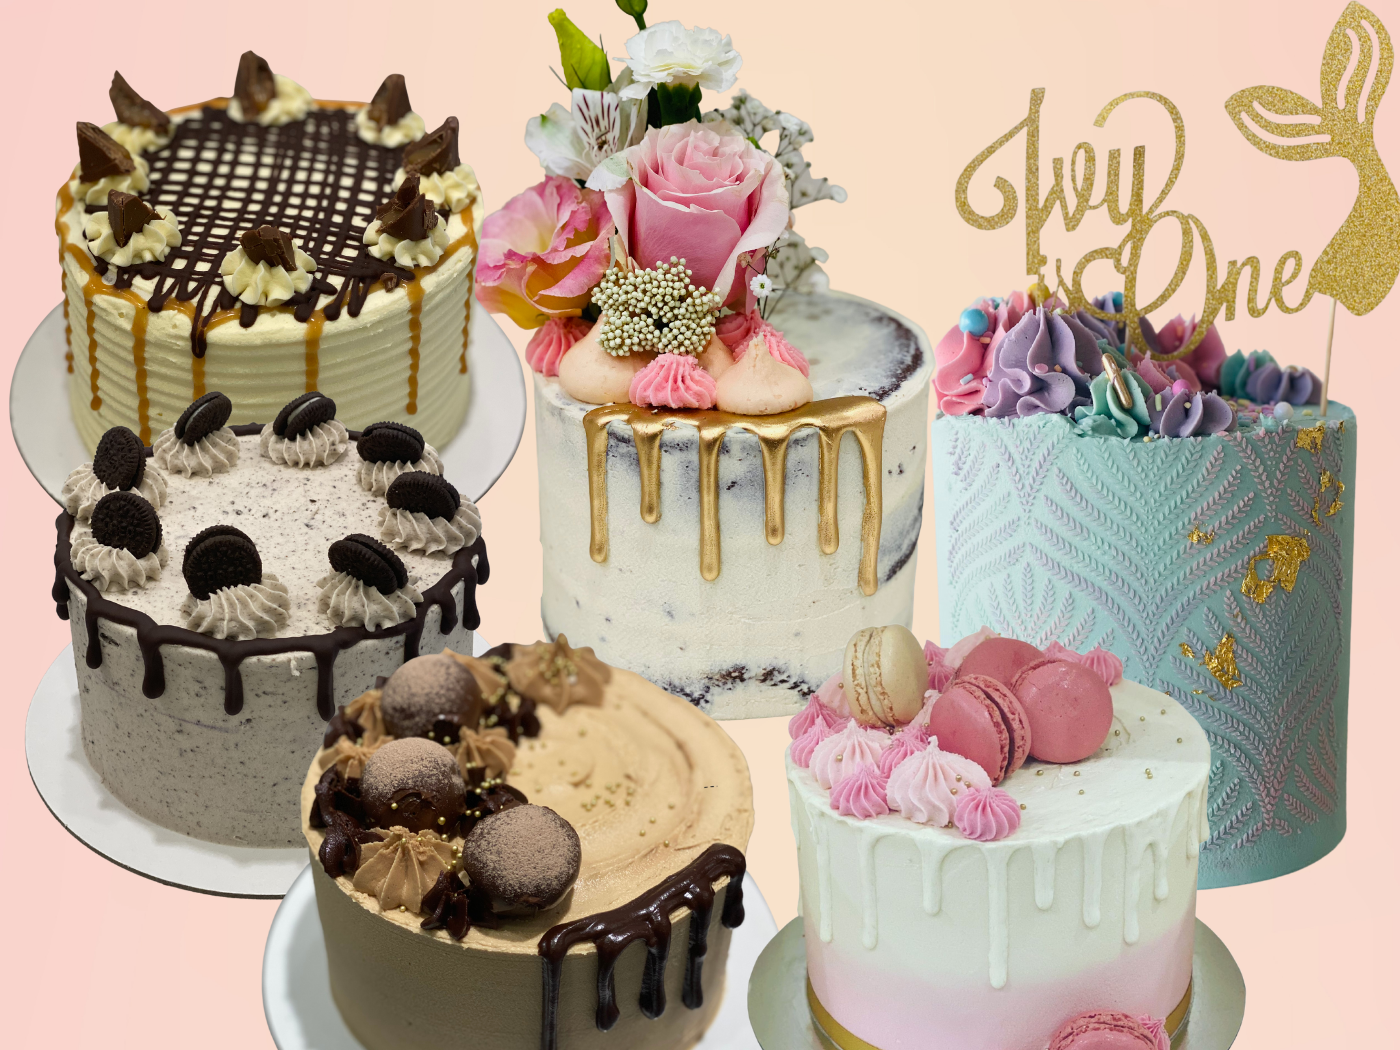 34 Birthday Cakes In Singapore Including Custom Cakes And Chocolate Cake |  Eatbook.sg